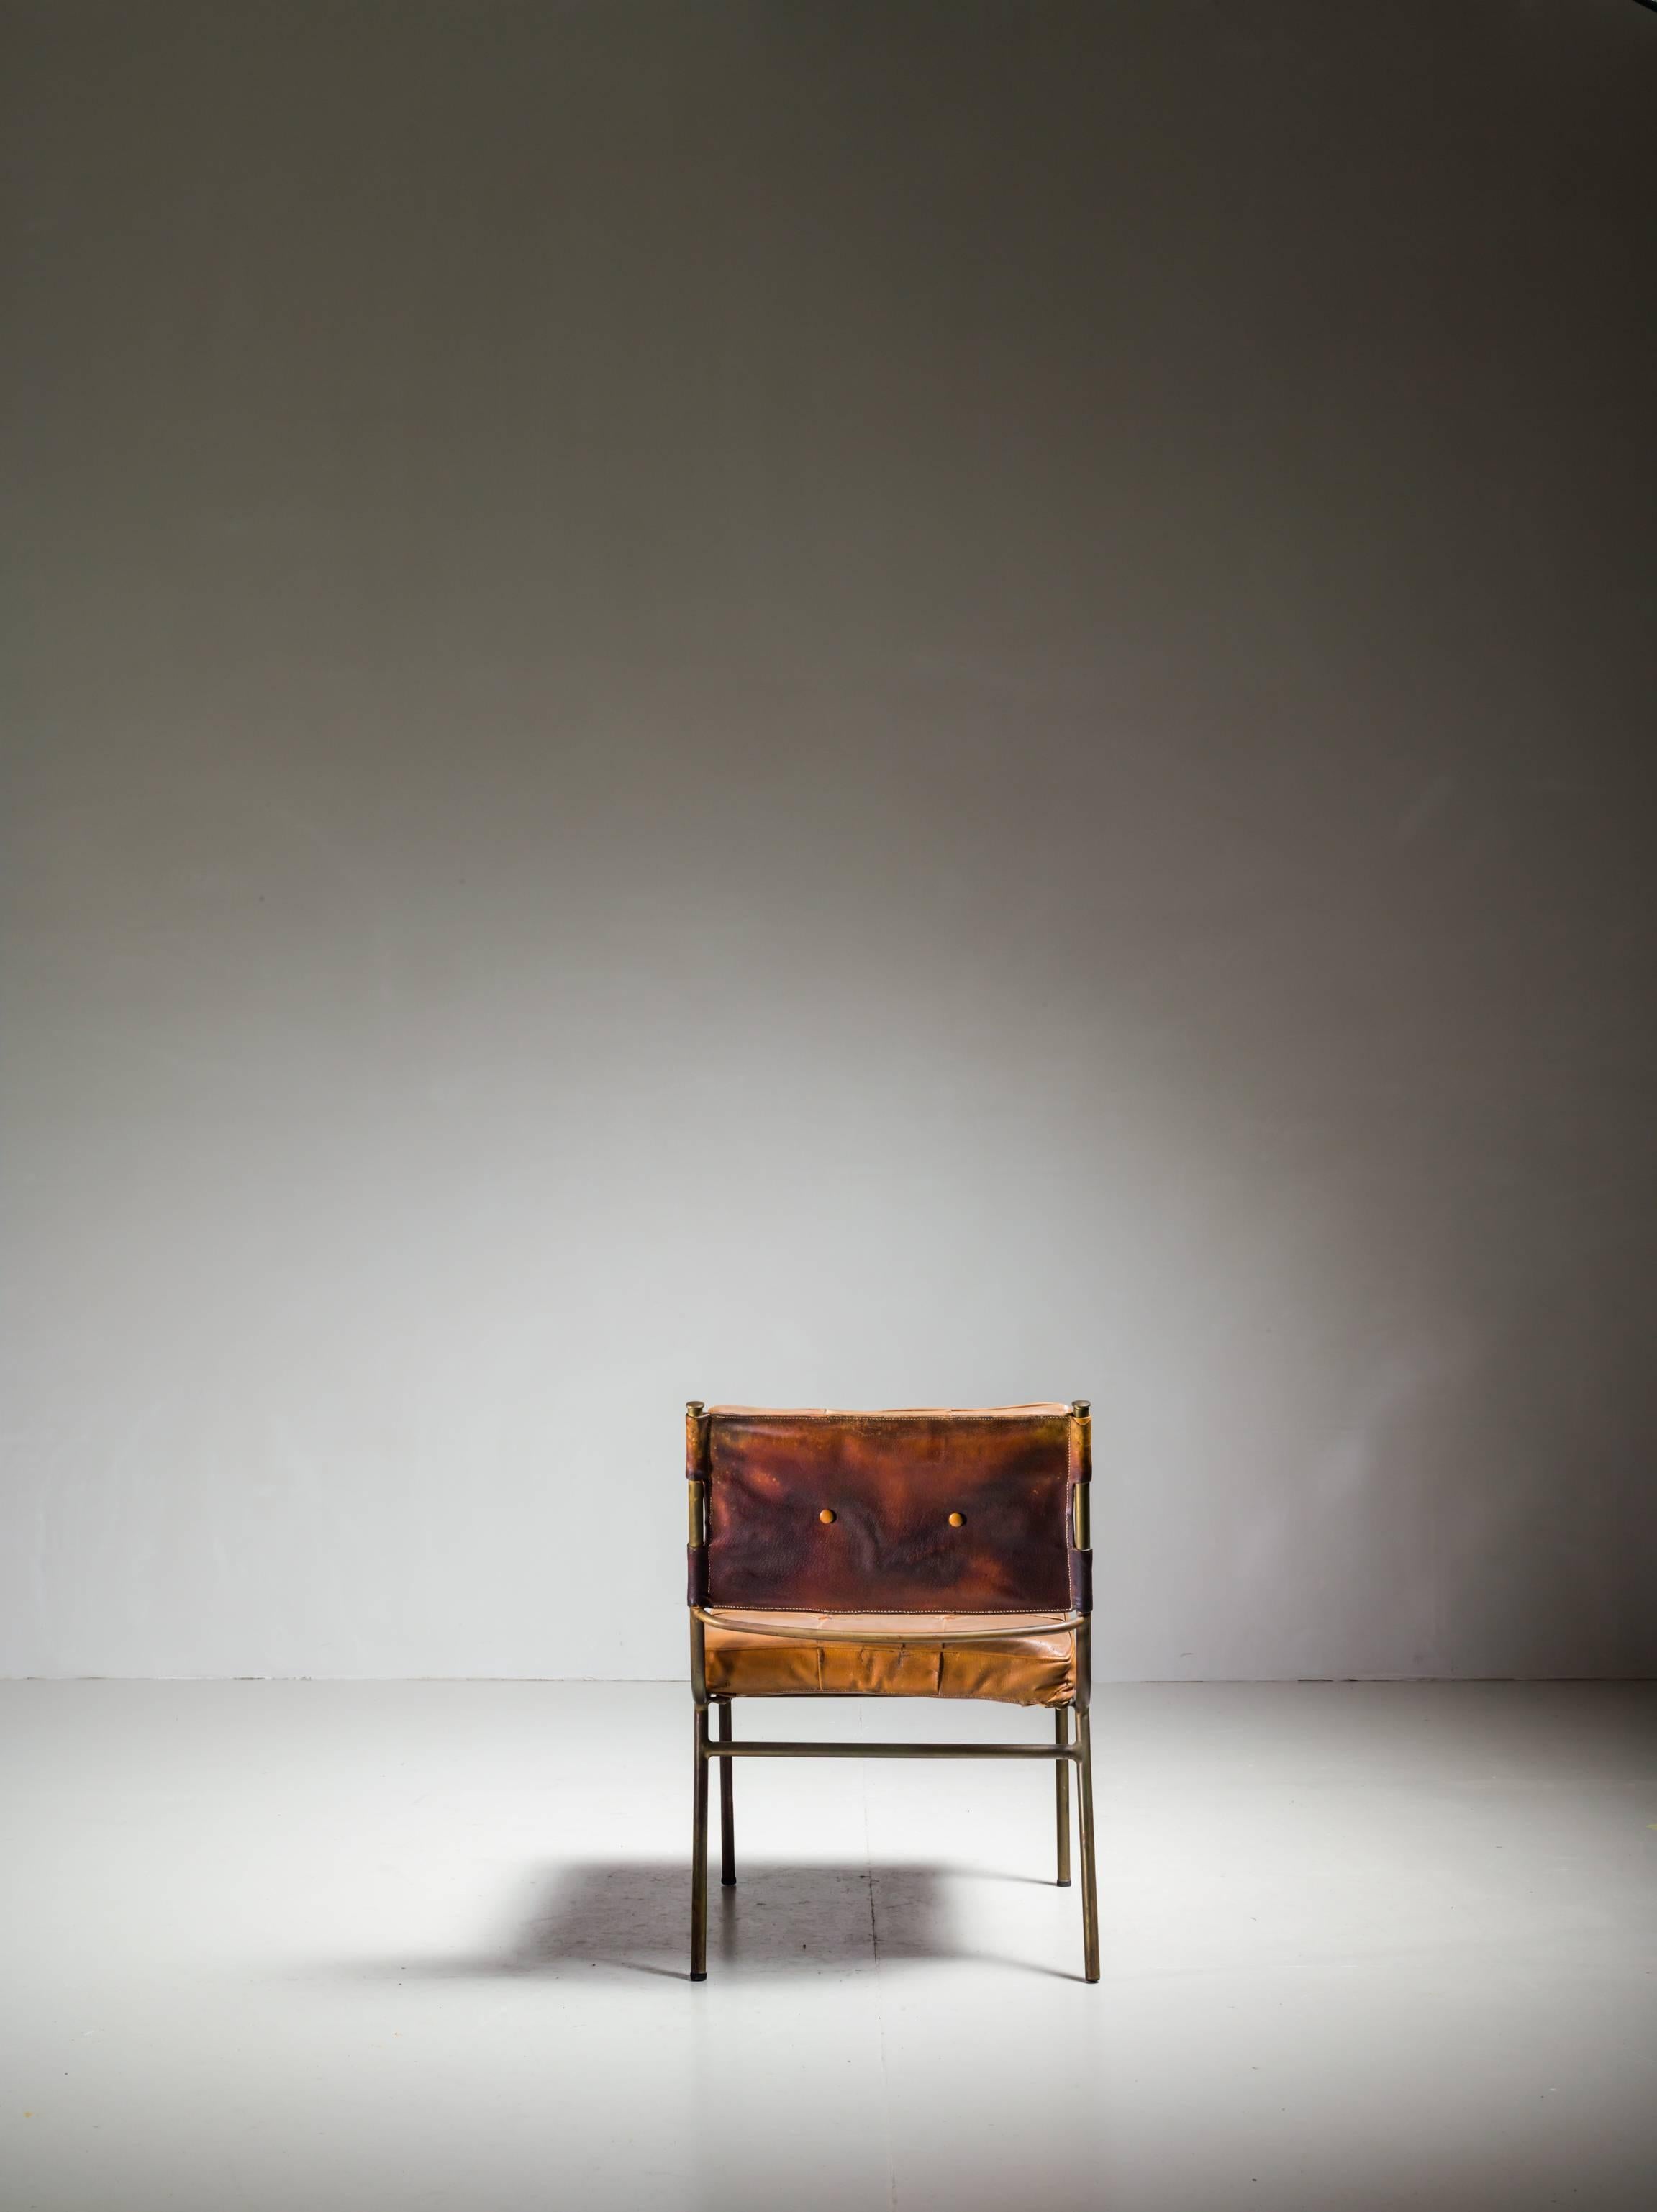 A rare and published Mathieu Matégot chair. The chair is made of a brass frame with a padded leather cushion and backrest. The backrest tilts back slightly, for a comfortable seating position.
The chair is in a beautiful condition.